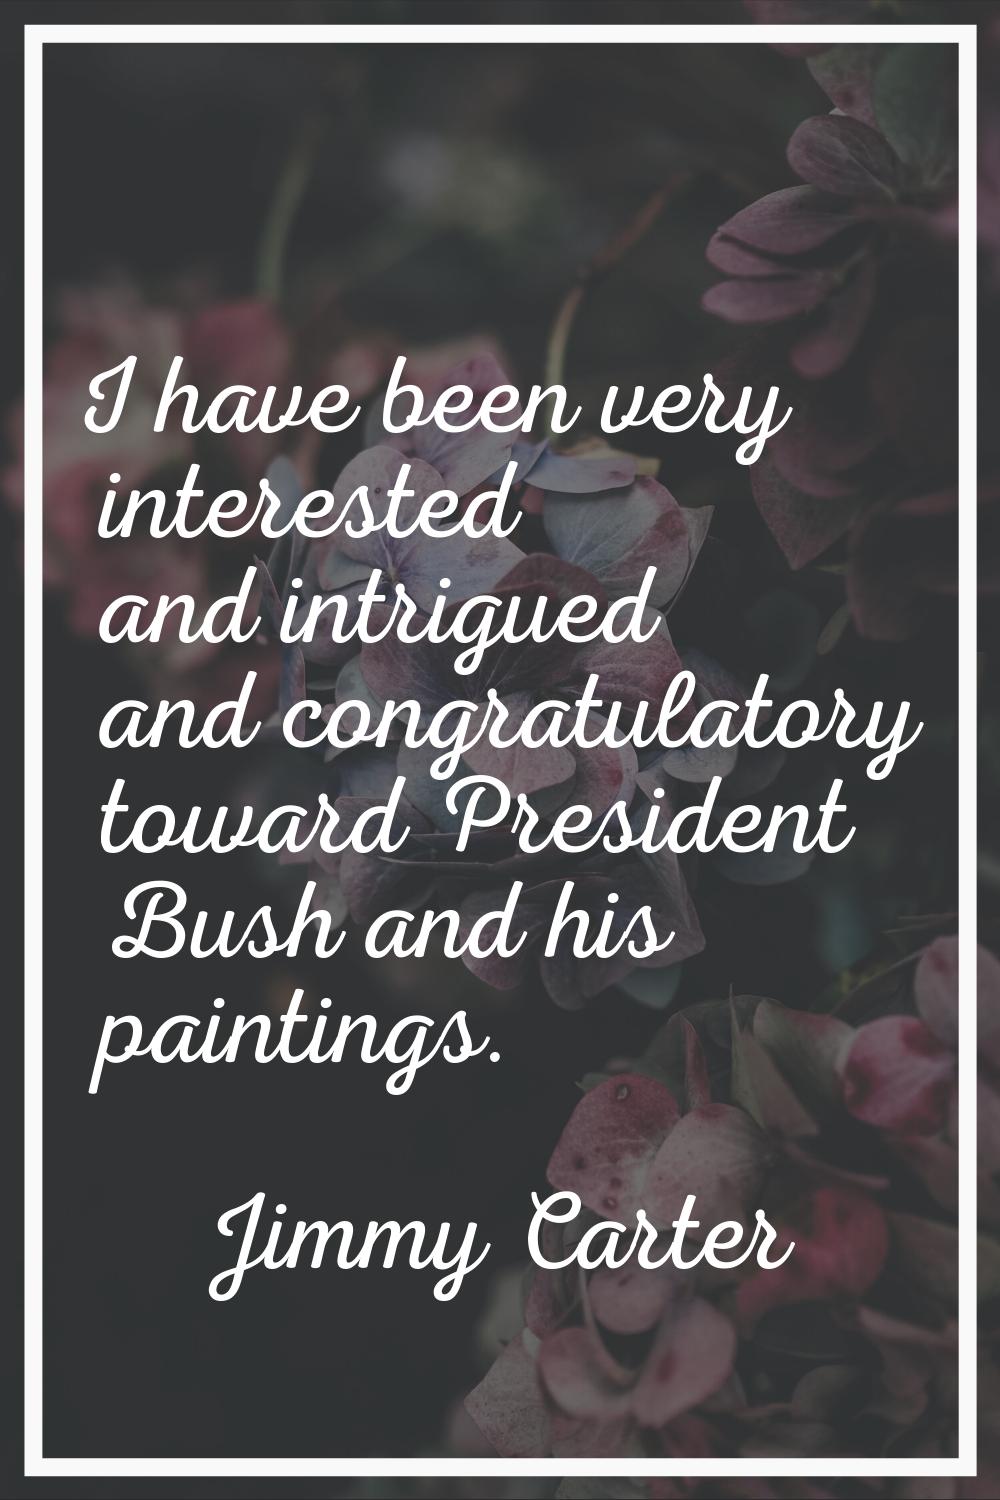 I have been very interested and intrigued and congratulatory toward President Bush and his painting